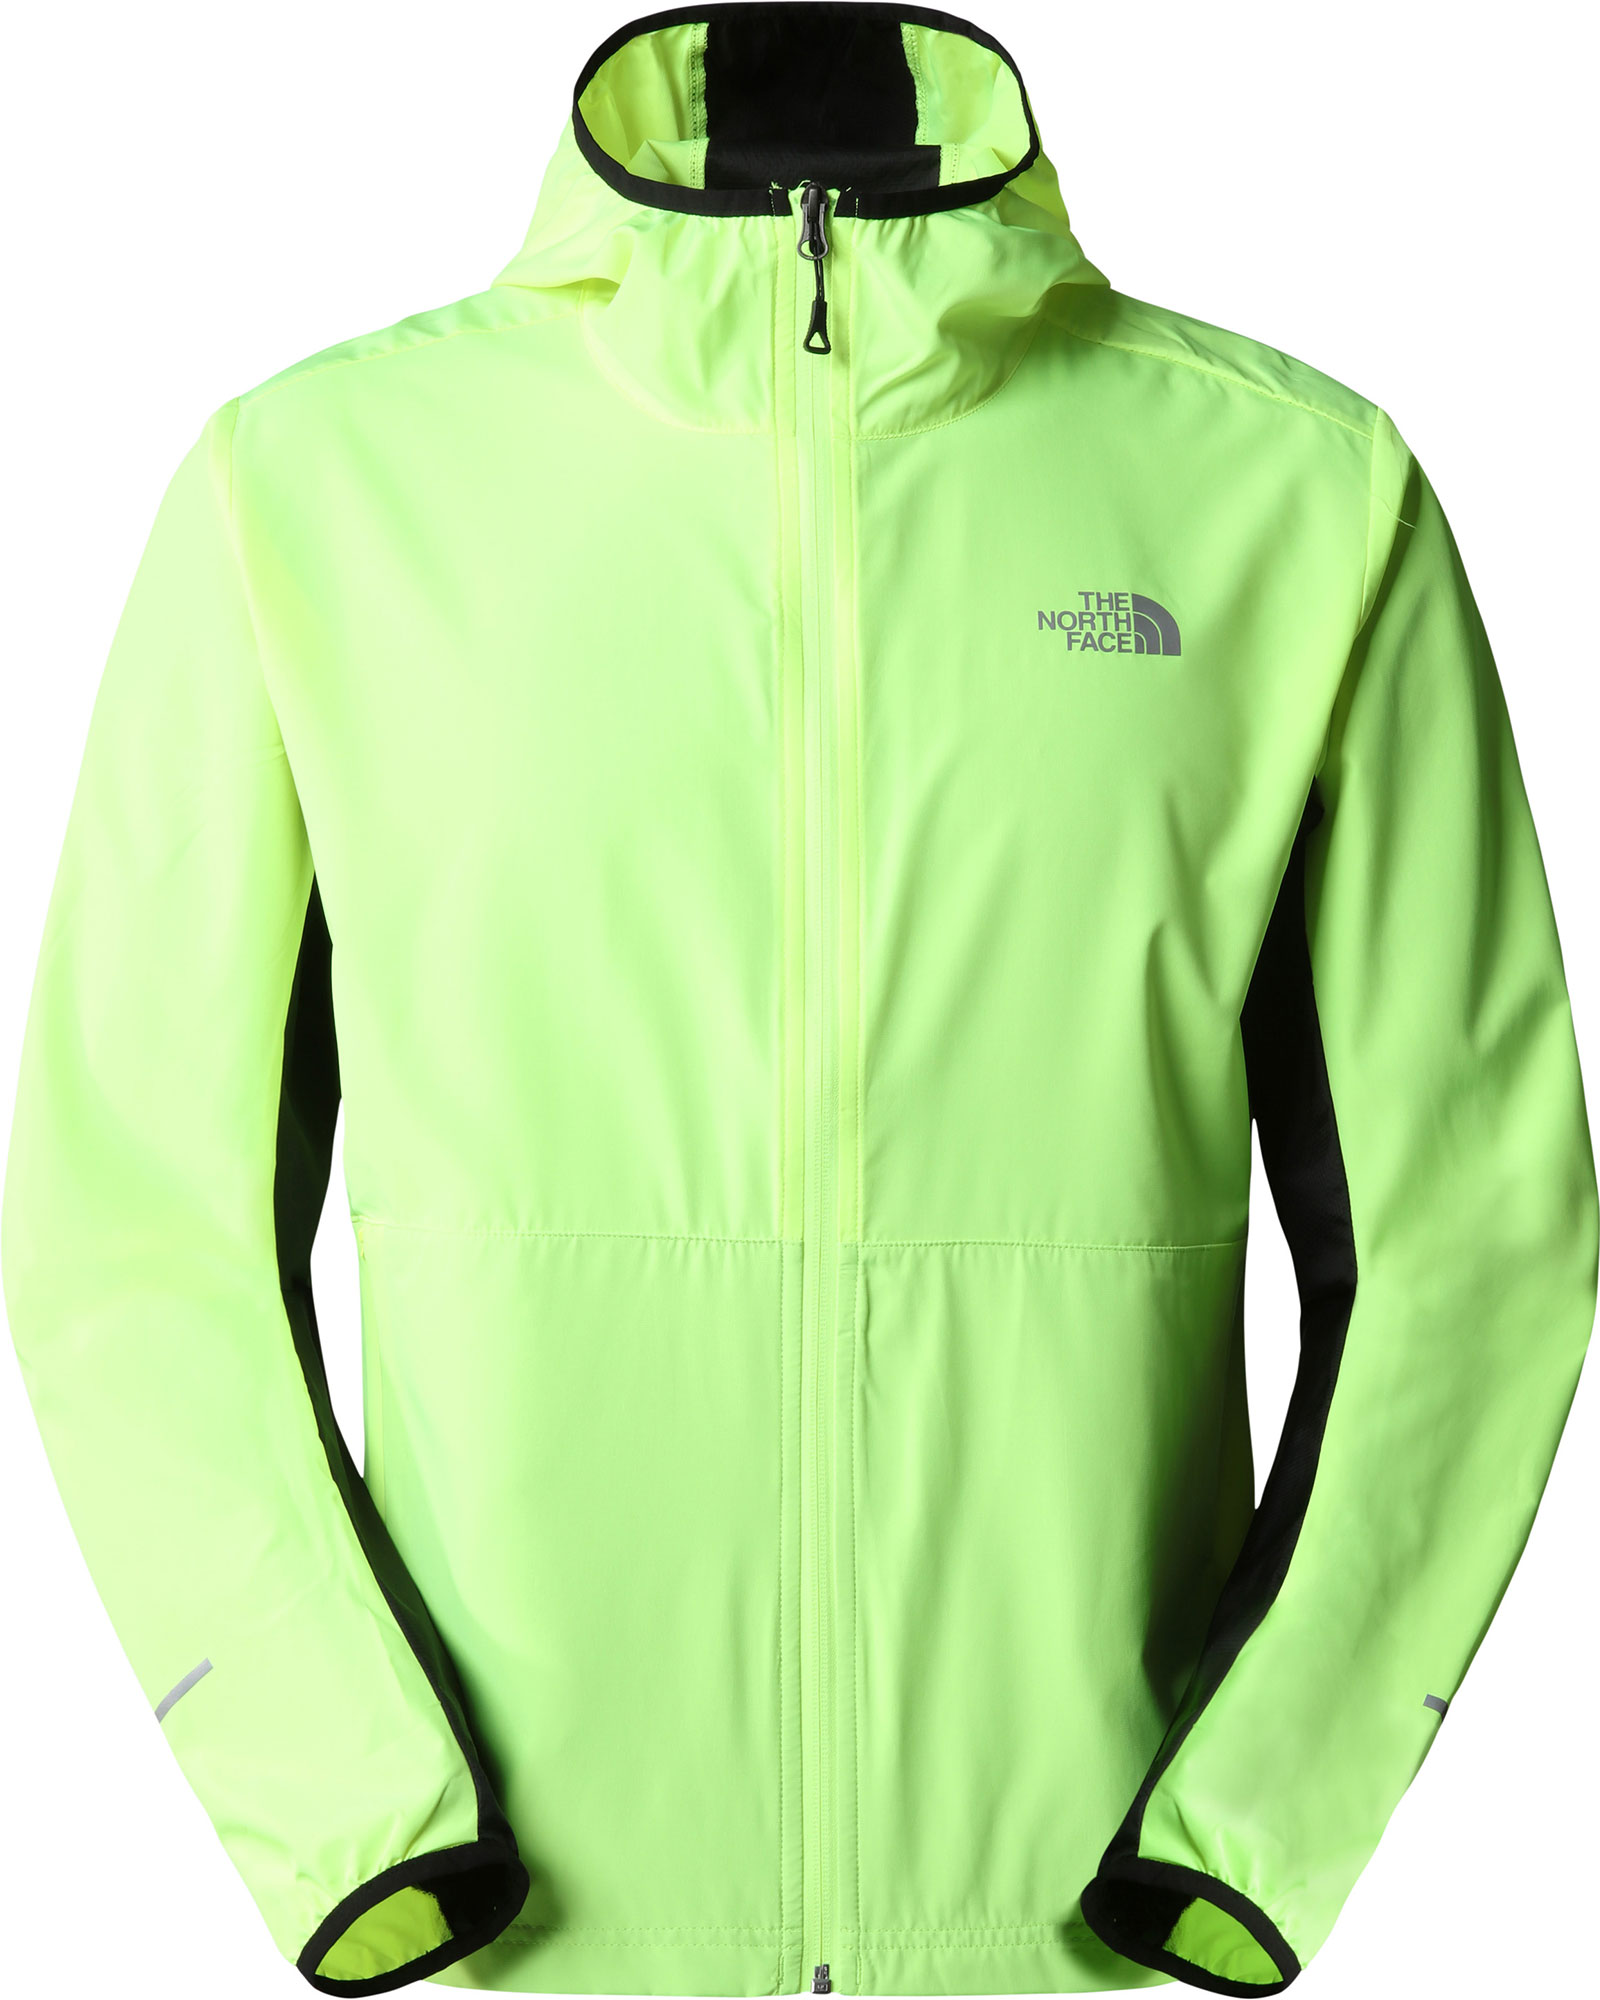 The North Face Men’s Run Wind Jacket - LED Yellow XL